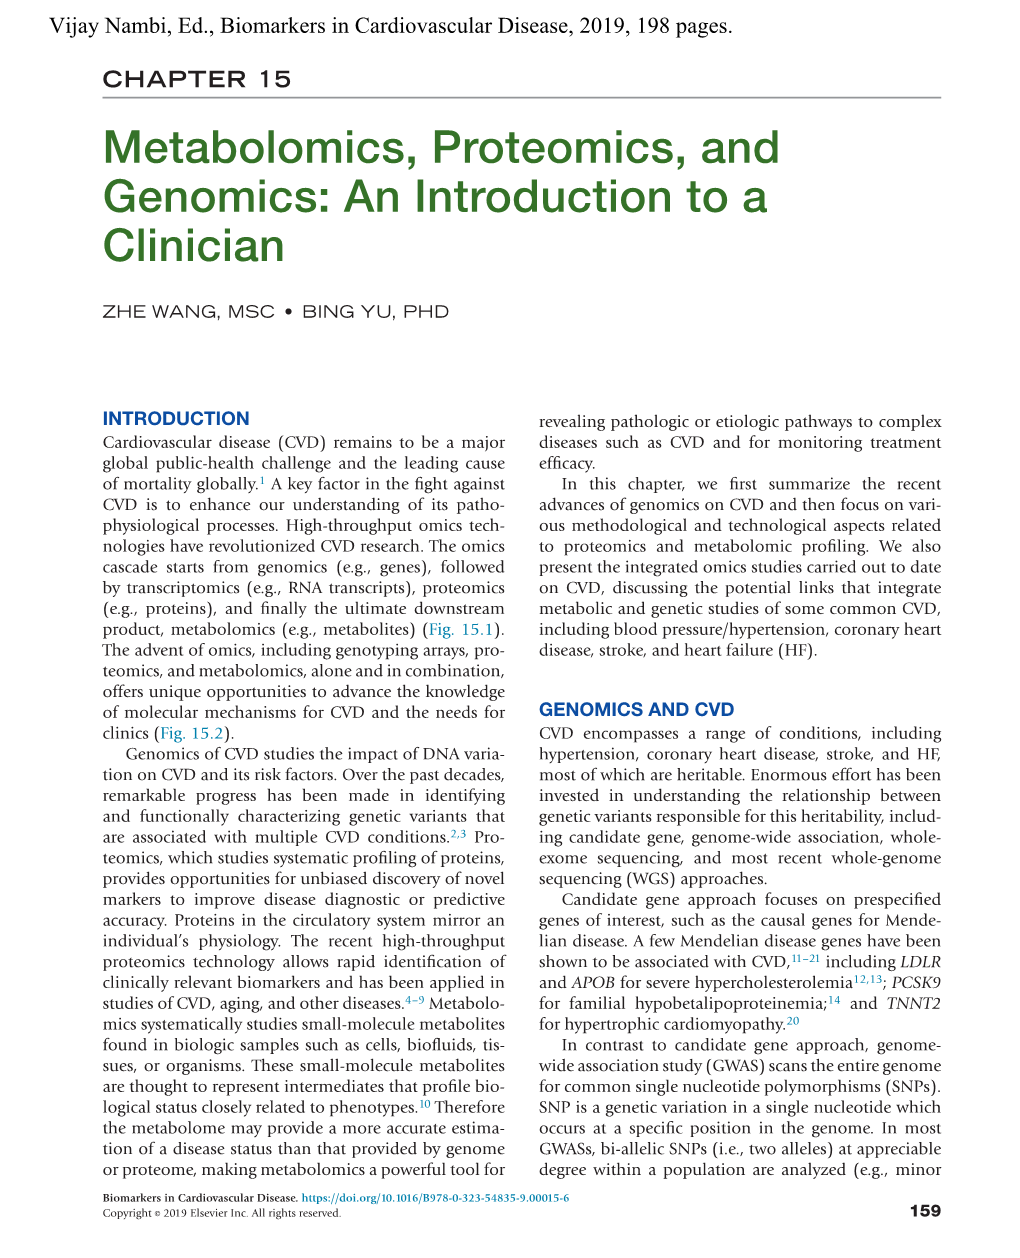 CHAPTER 15 Metabolomics, Proteomics, and Genomics: an Introduction to a Clinician